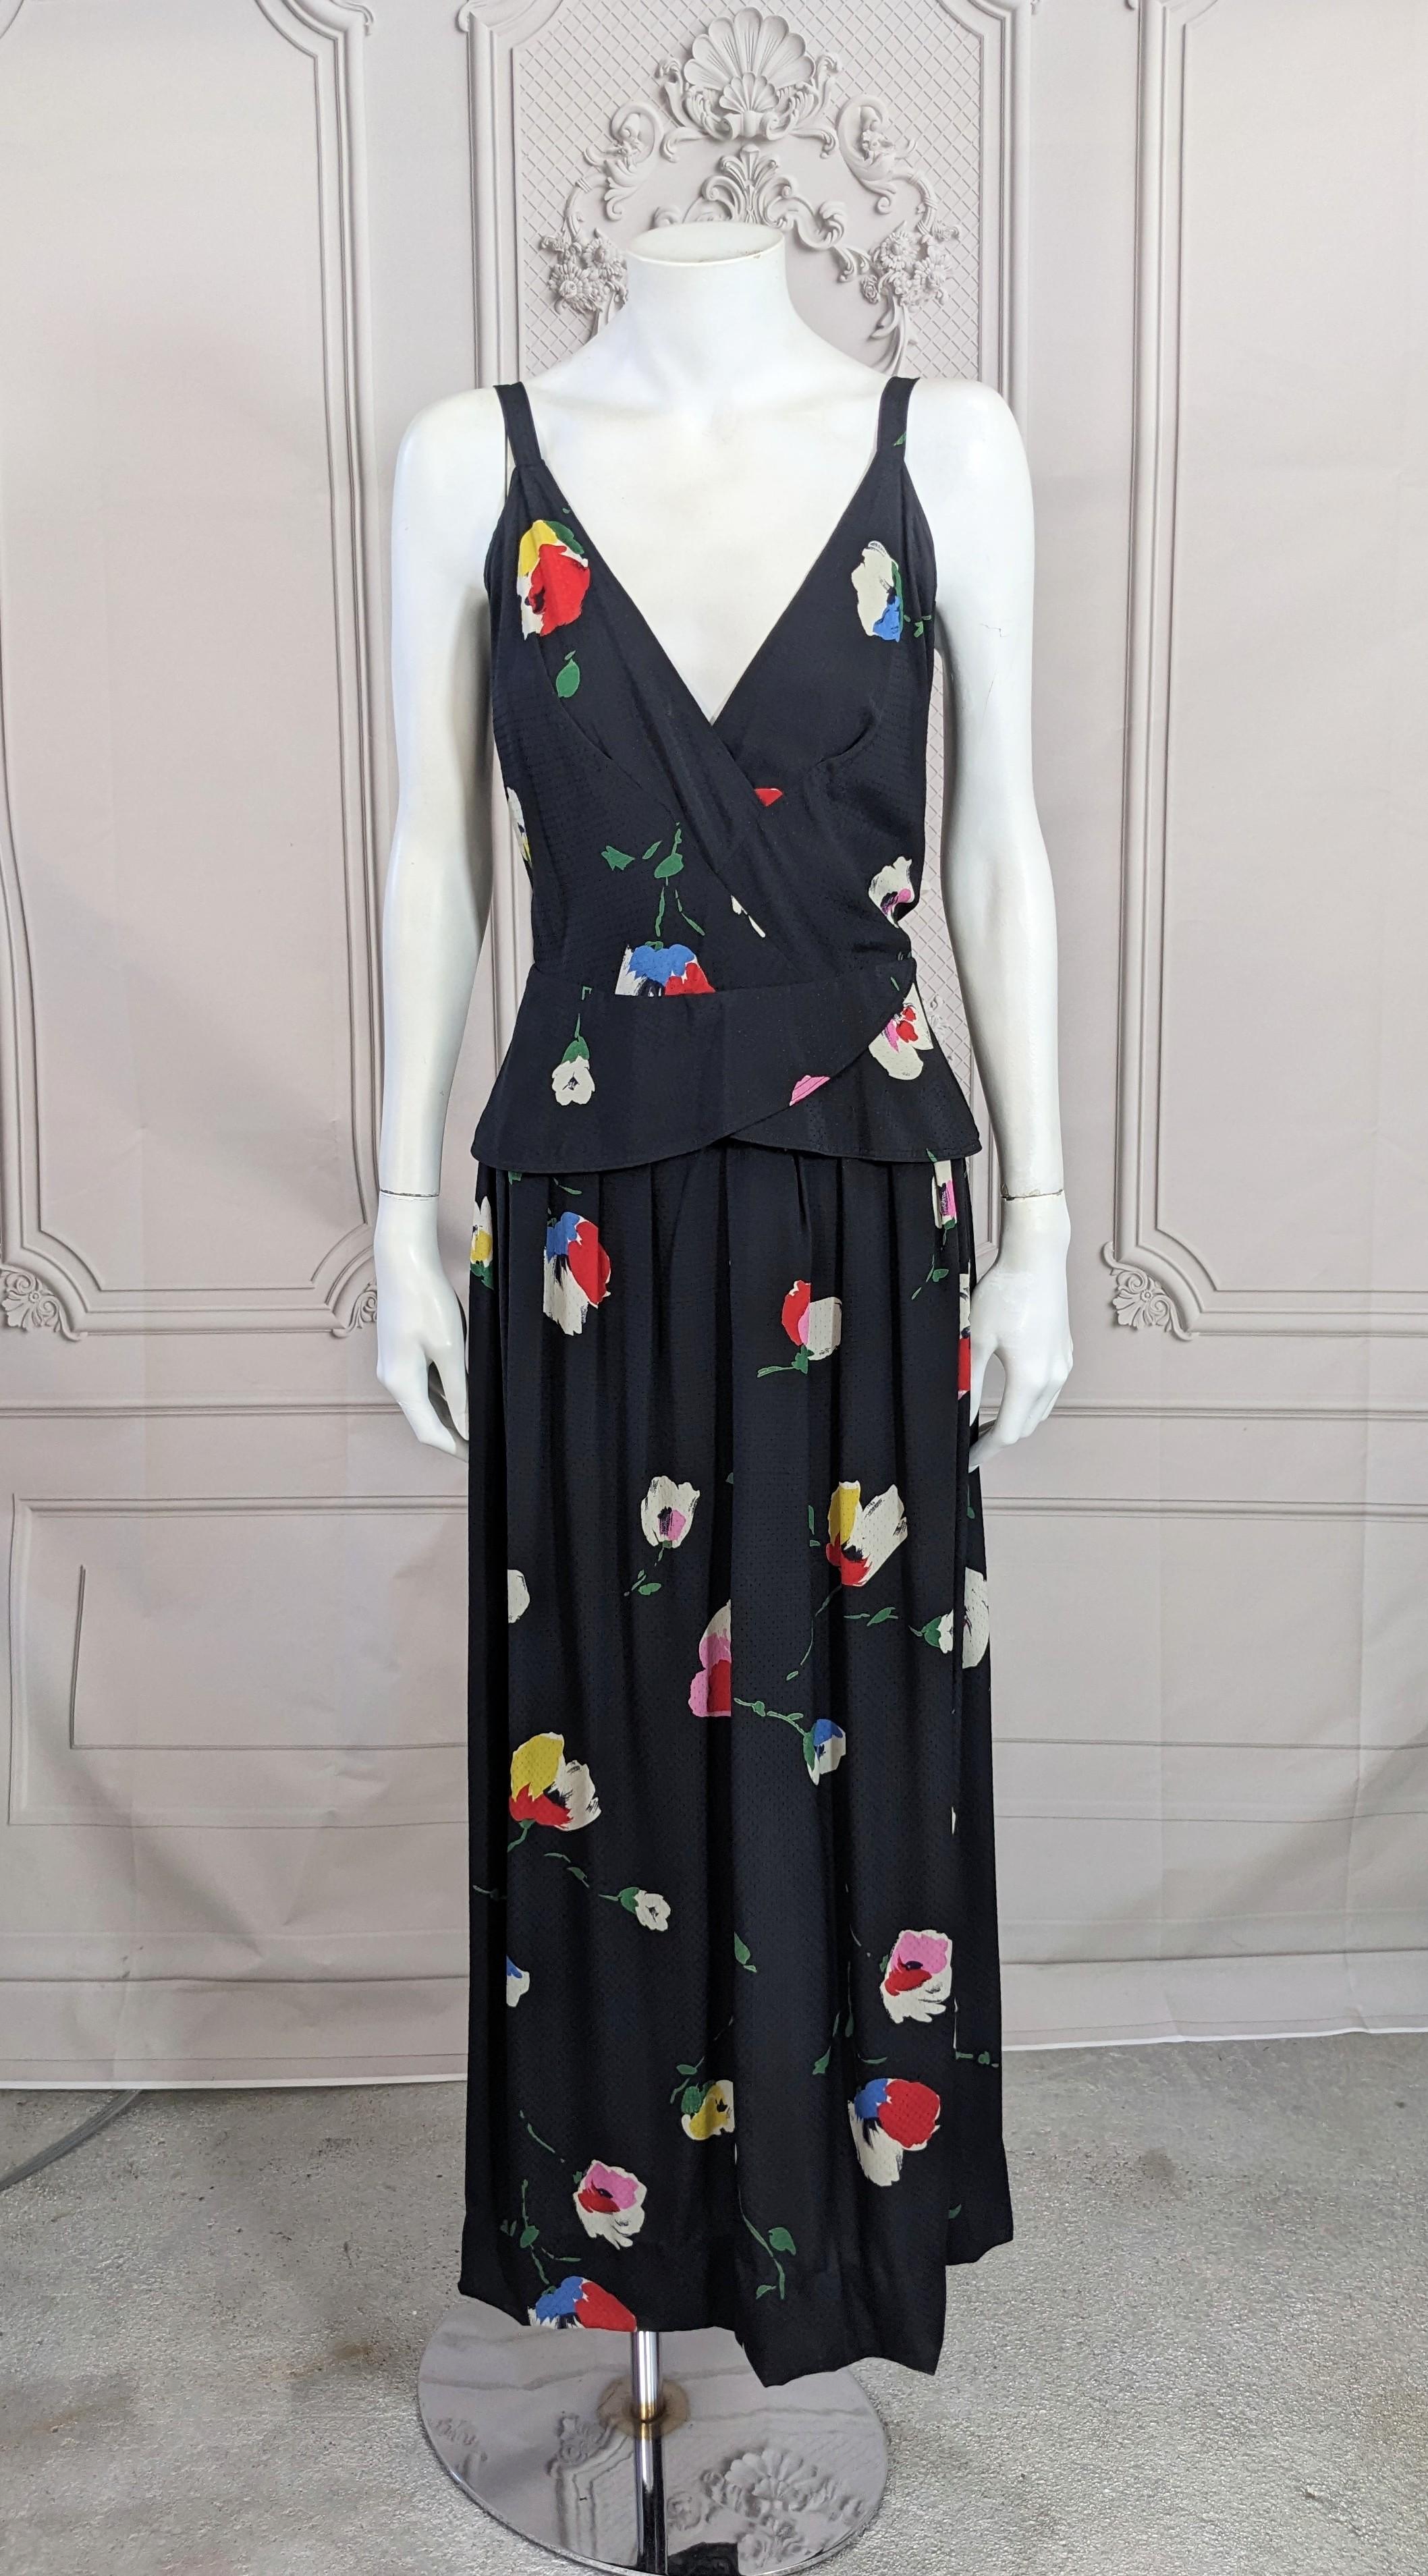 Karl Lagerfeld for Chloe Silk Crepe Print Gown from the 1970's. Charming faux wrap one piece design with attached peplum detail. Floral silk damask crepe print which closes with a series of hooks and zipper on back. From the period where Lagerfeld